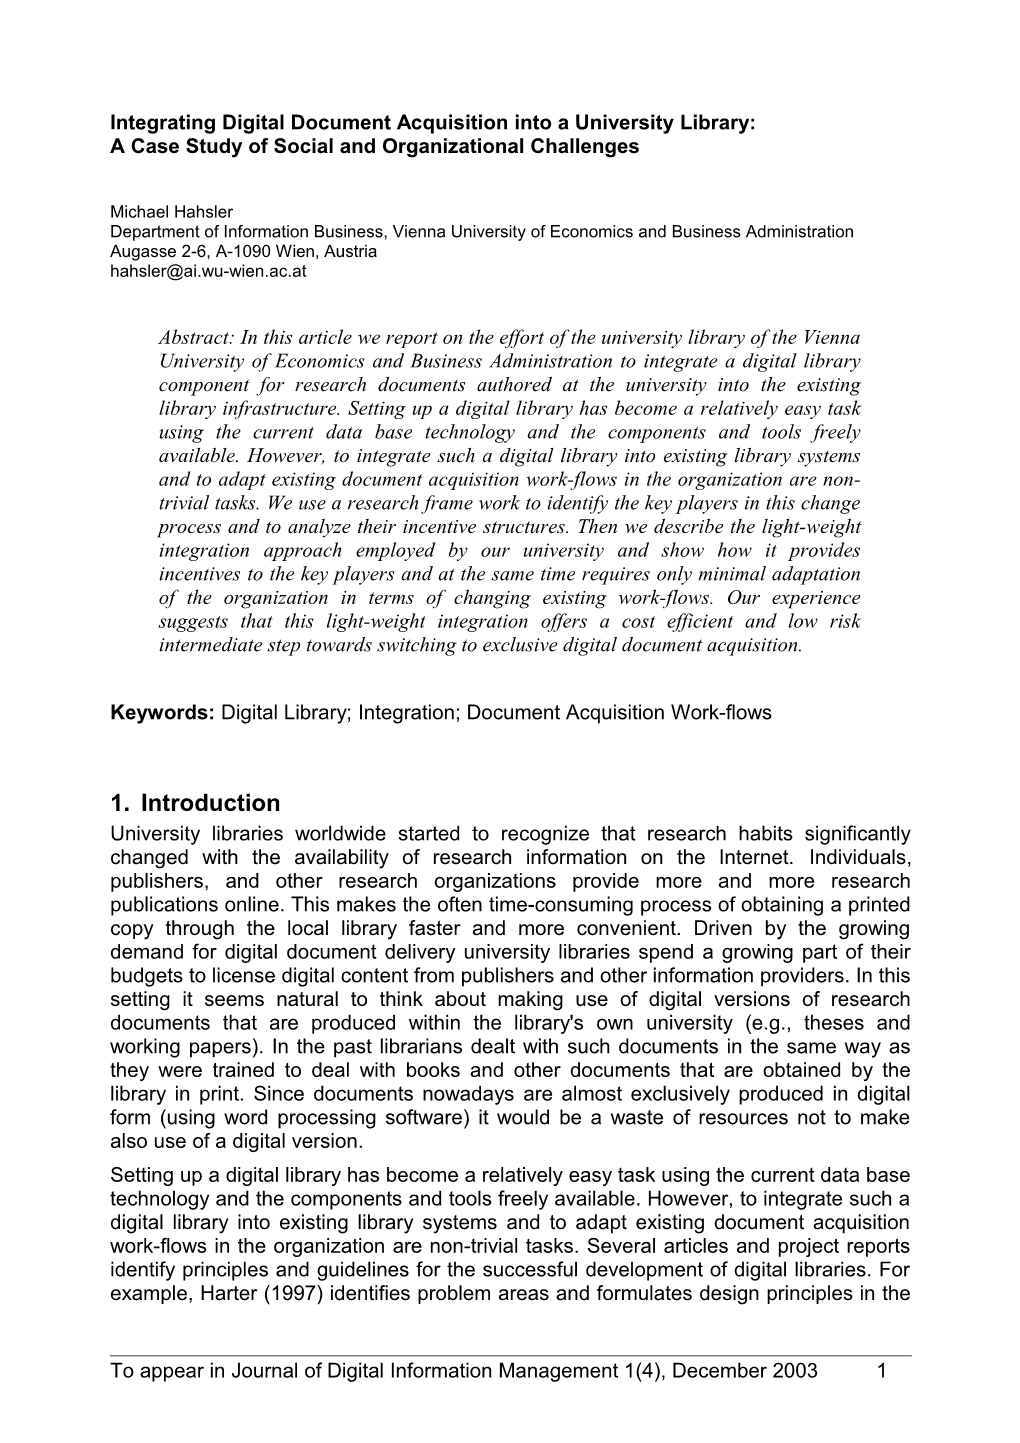 Academic Digital Libraries: a Case Study of Social and Organizational Implications